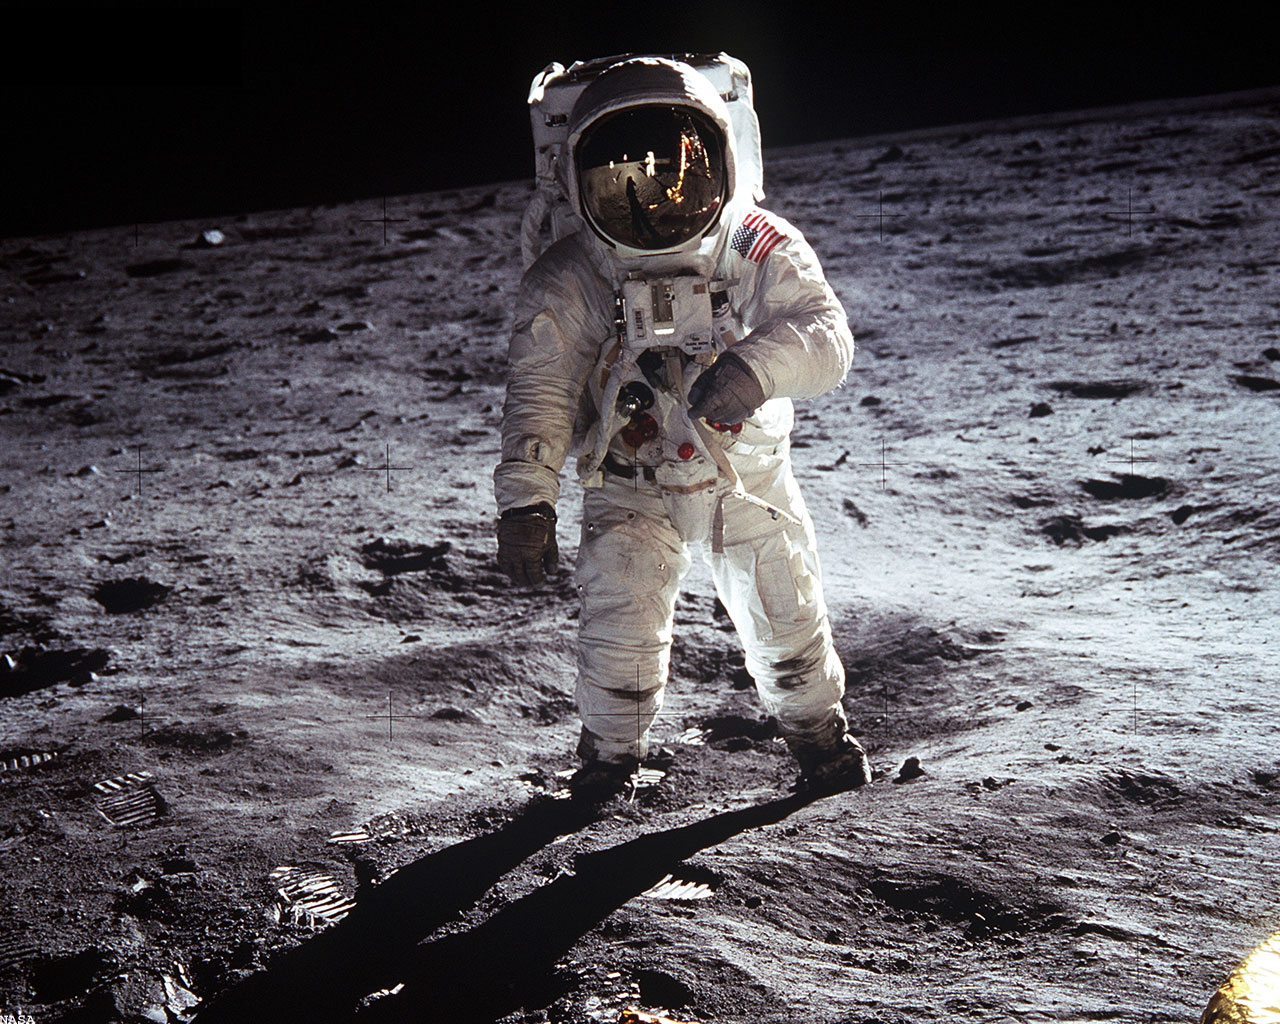 Download full size Spaceman on moon Space wallpaper / 1280x1024